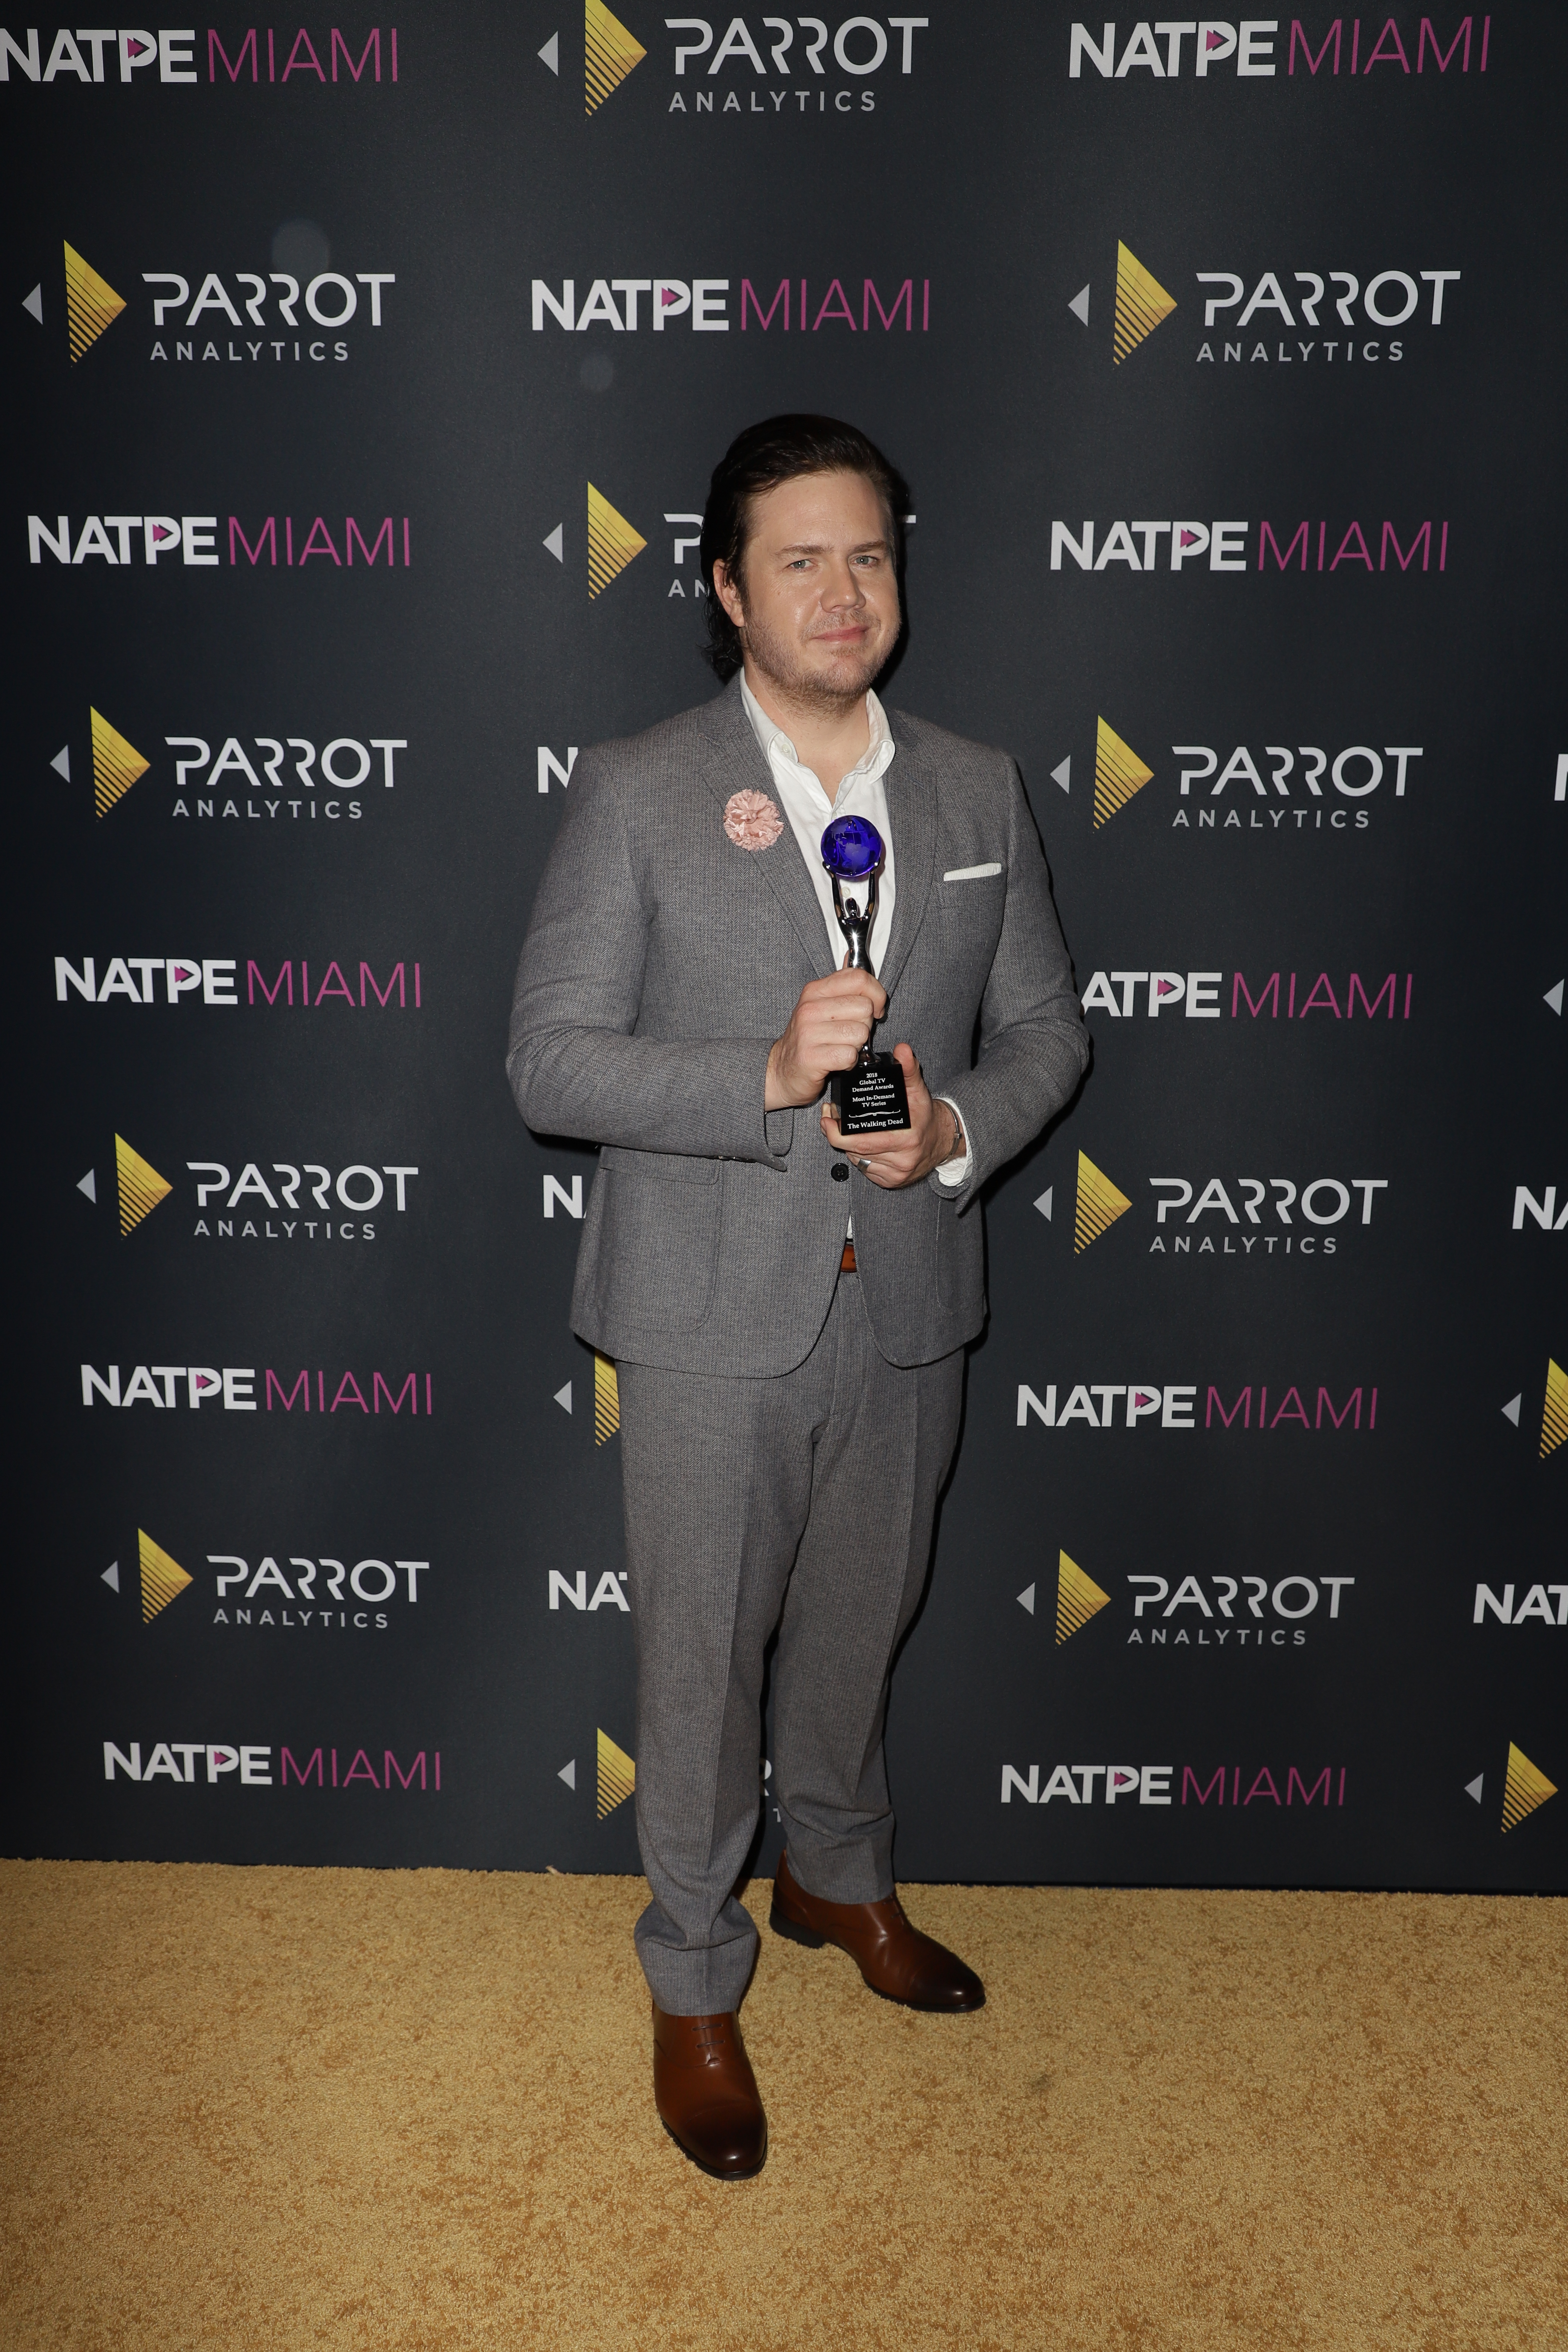 The Walking Dead actor Josh McDermitt at the Global TV Demand Awards. (Photo by John Parra/Getty Images for Parrot Analytics)